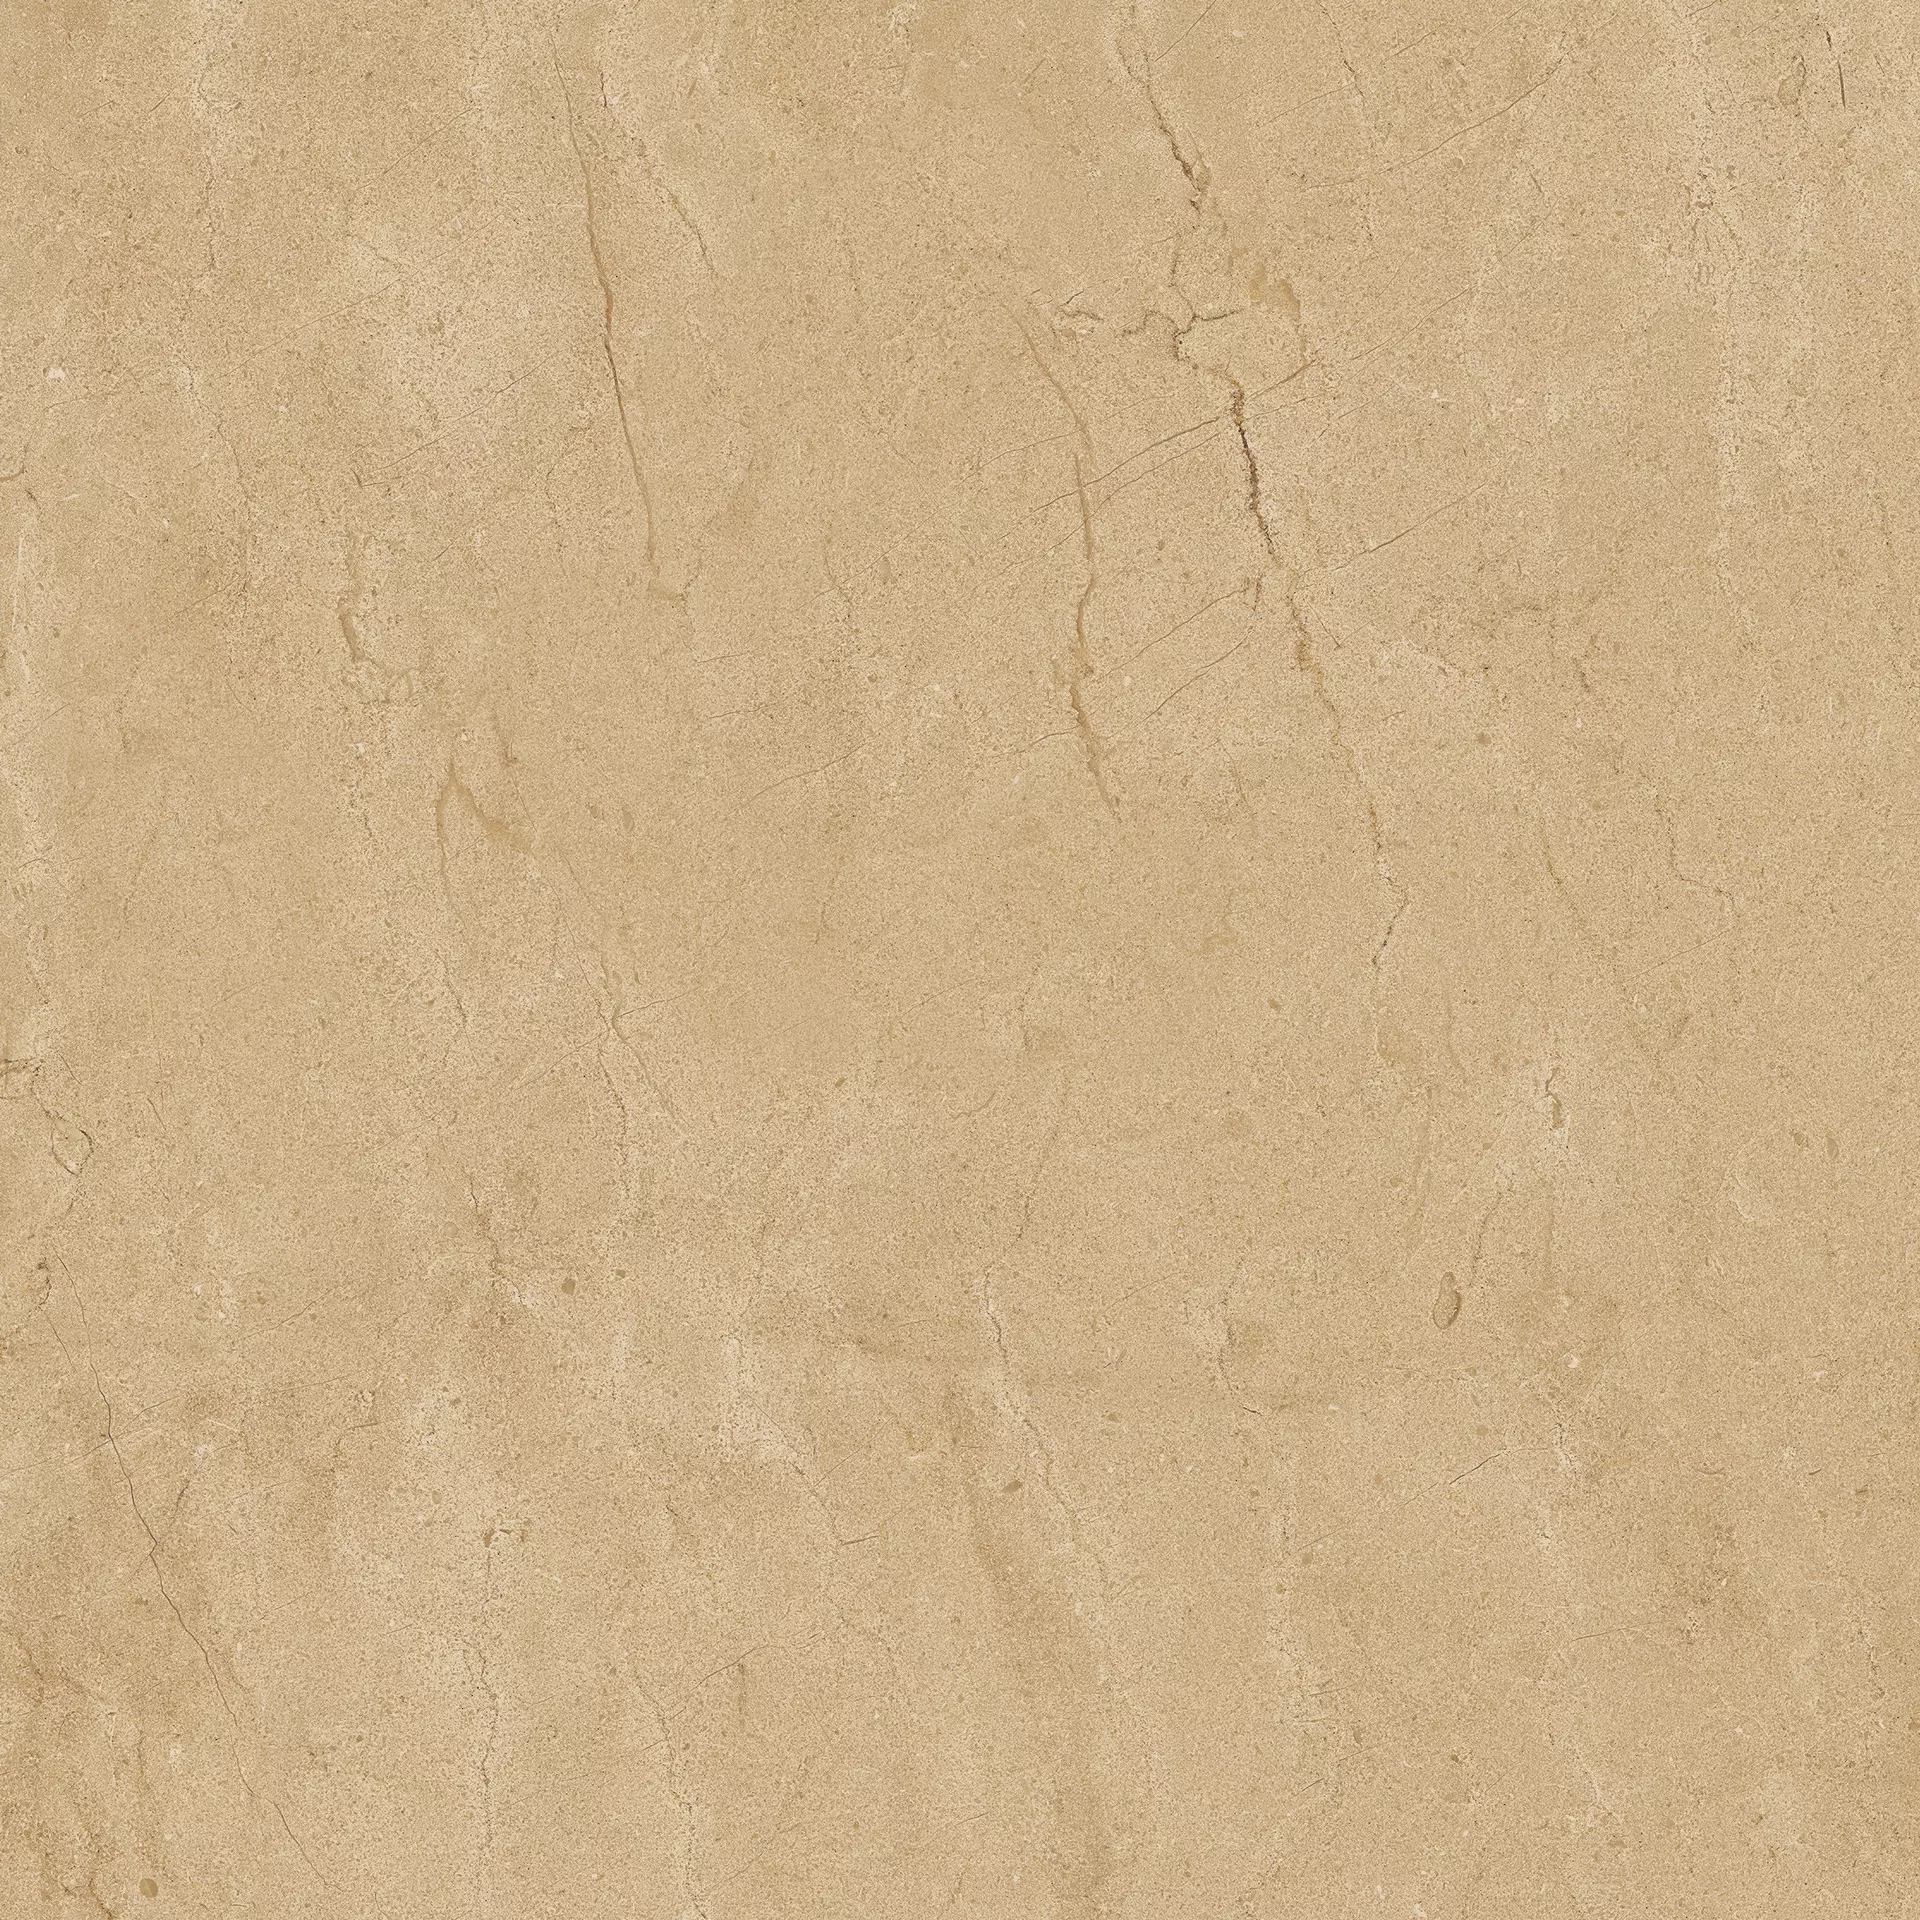 Marazzi Allmarble Crema Marfil Lux MELY 60x60cm rectified 10mm